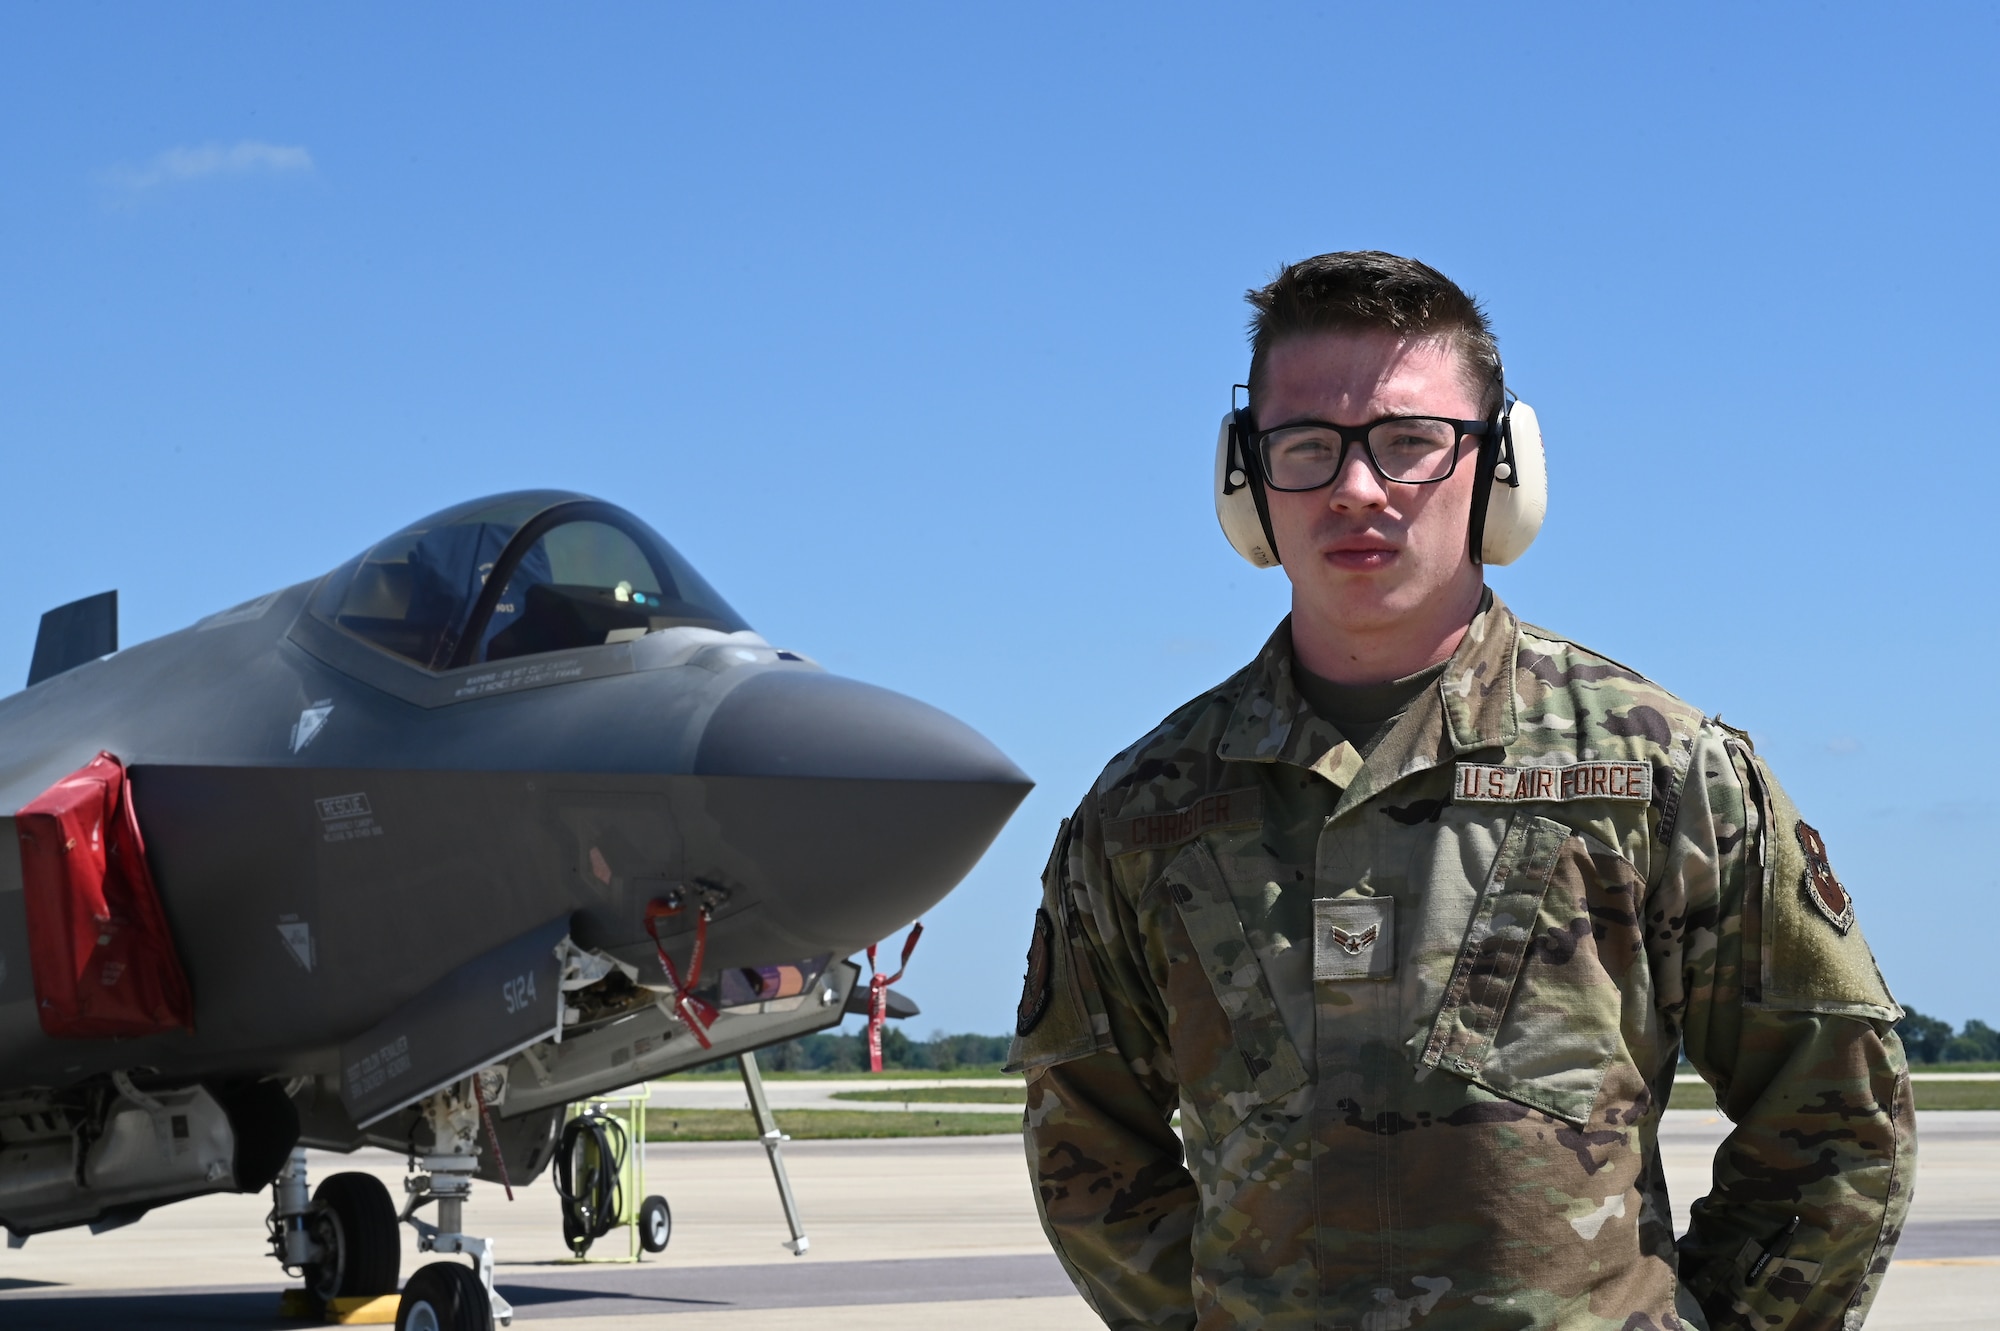 Aircraft fuel systems maintainers are responsible for diagnosing and repairing fuel system malfunctions, and correcting problems before F-35A Lightning II jets are airborne.